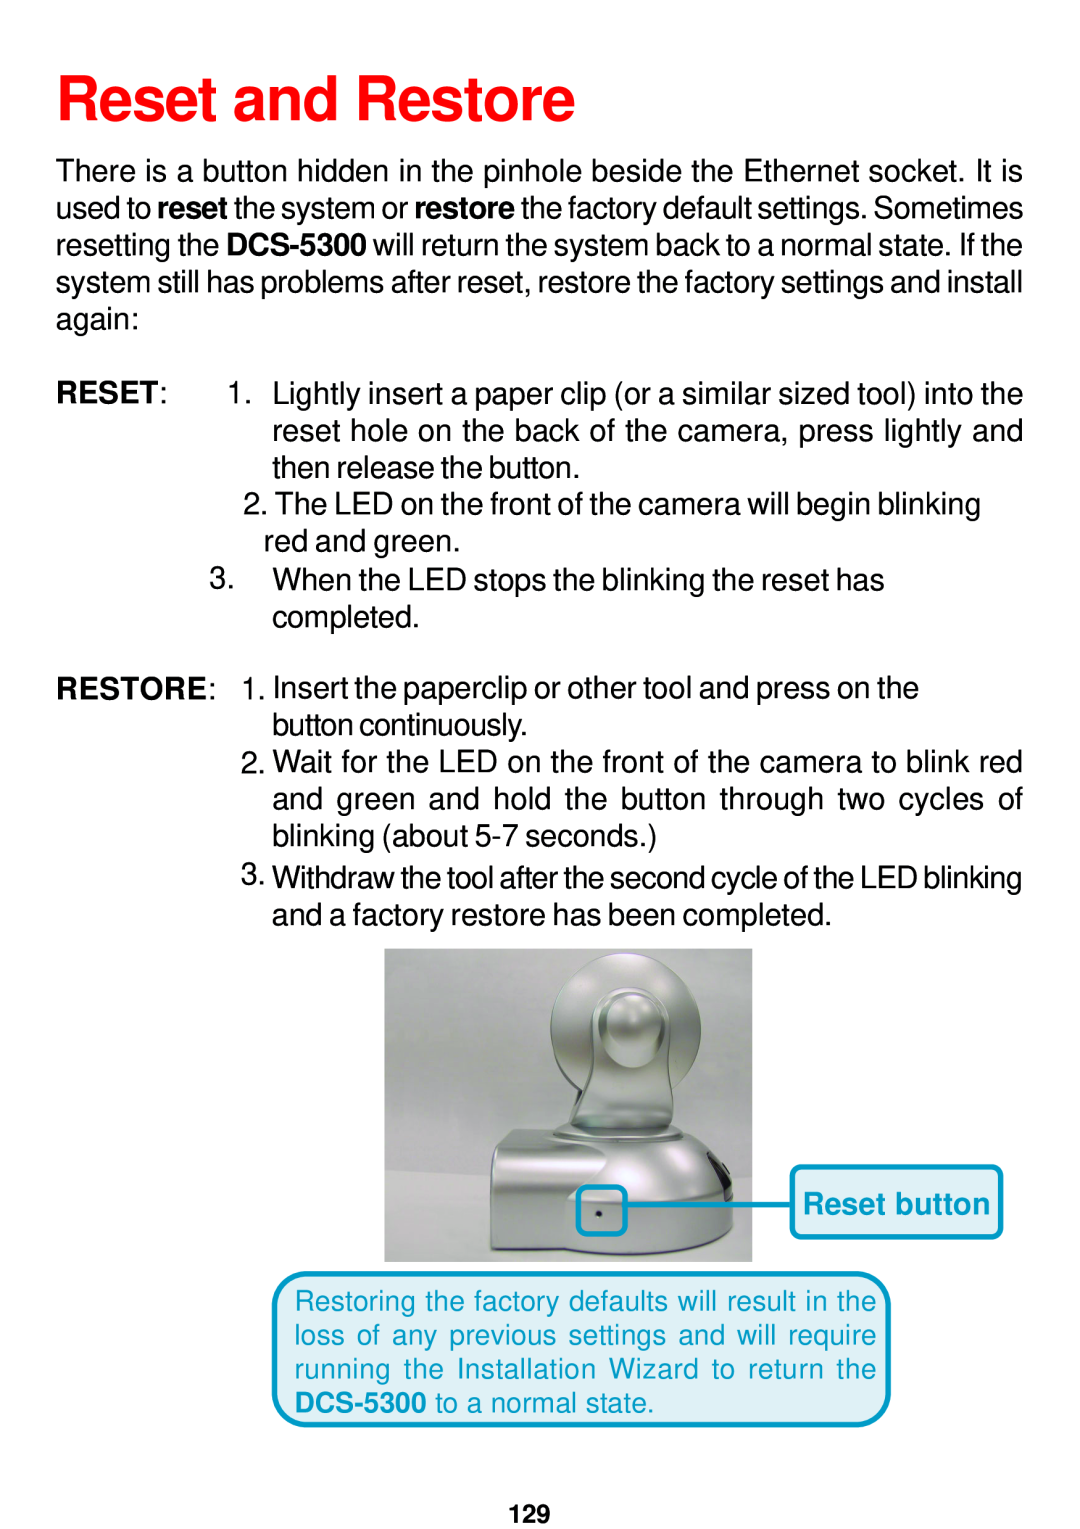 D-Link DCS-5300 manual Reset and Restore, Reset button 